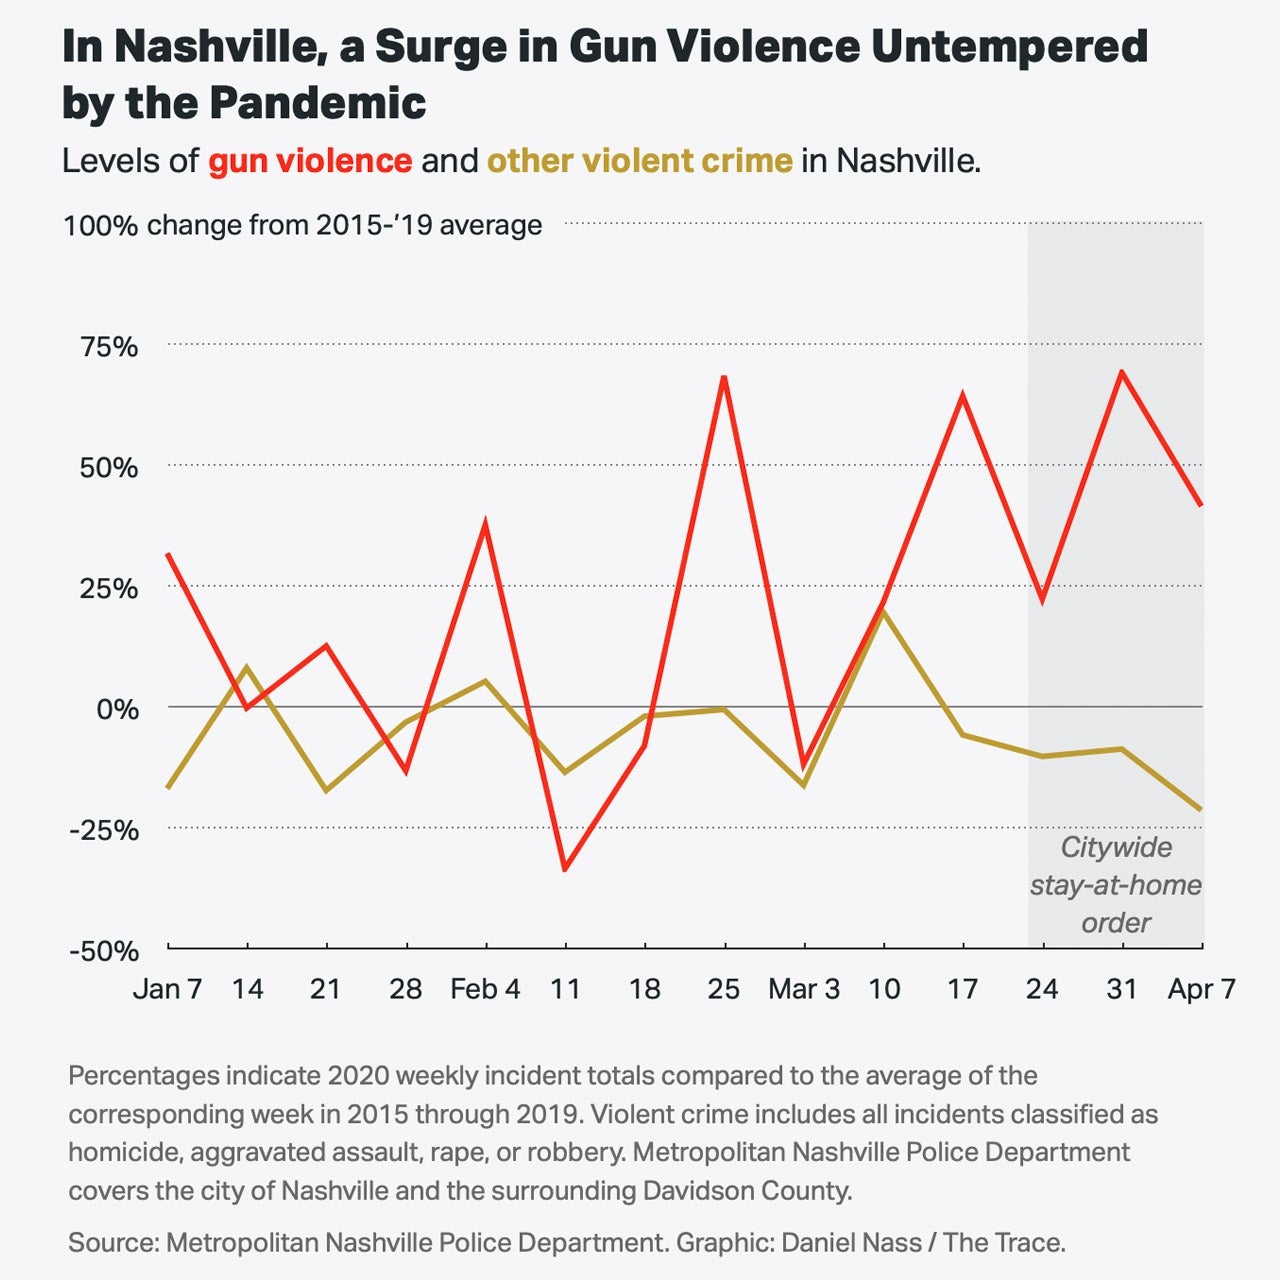 A chart showing that, in Nashville, there was a surge in gun violence untempered by the pandemic.